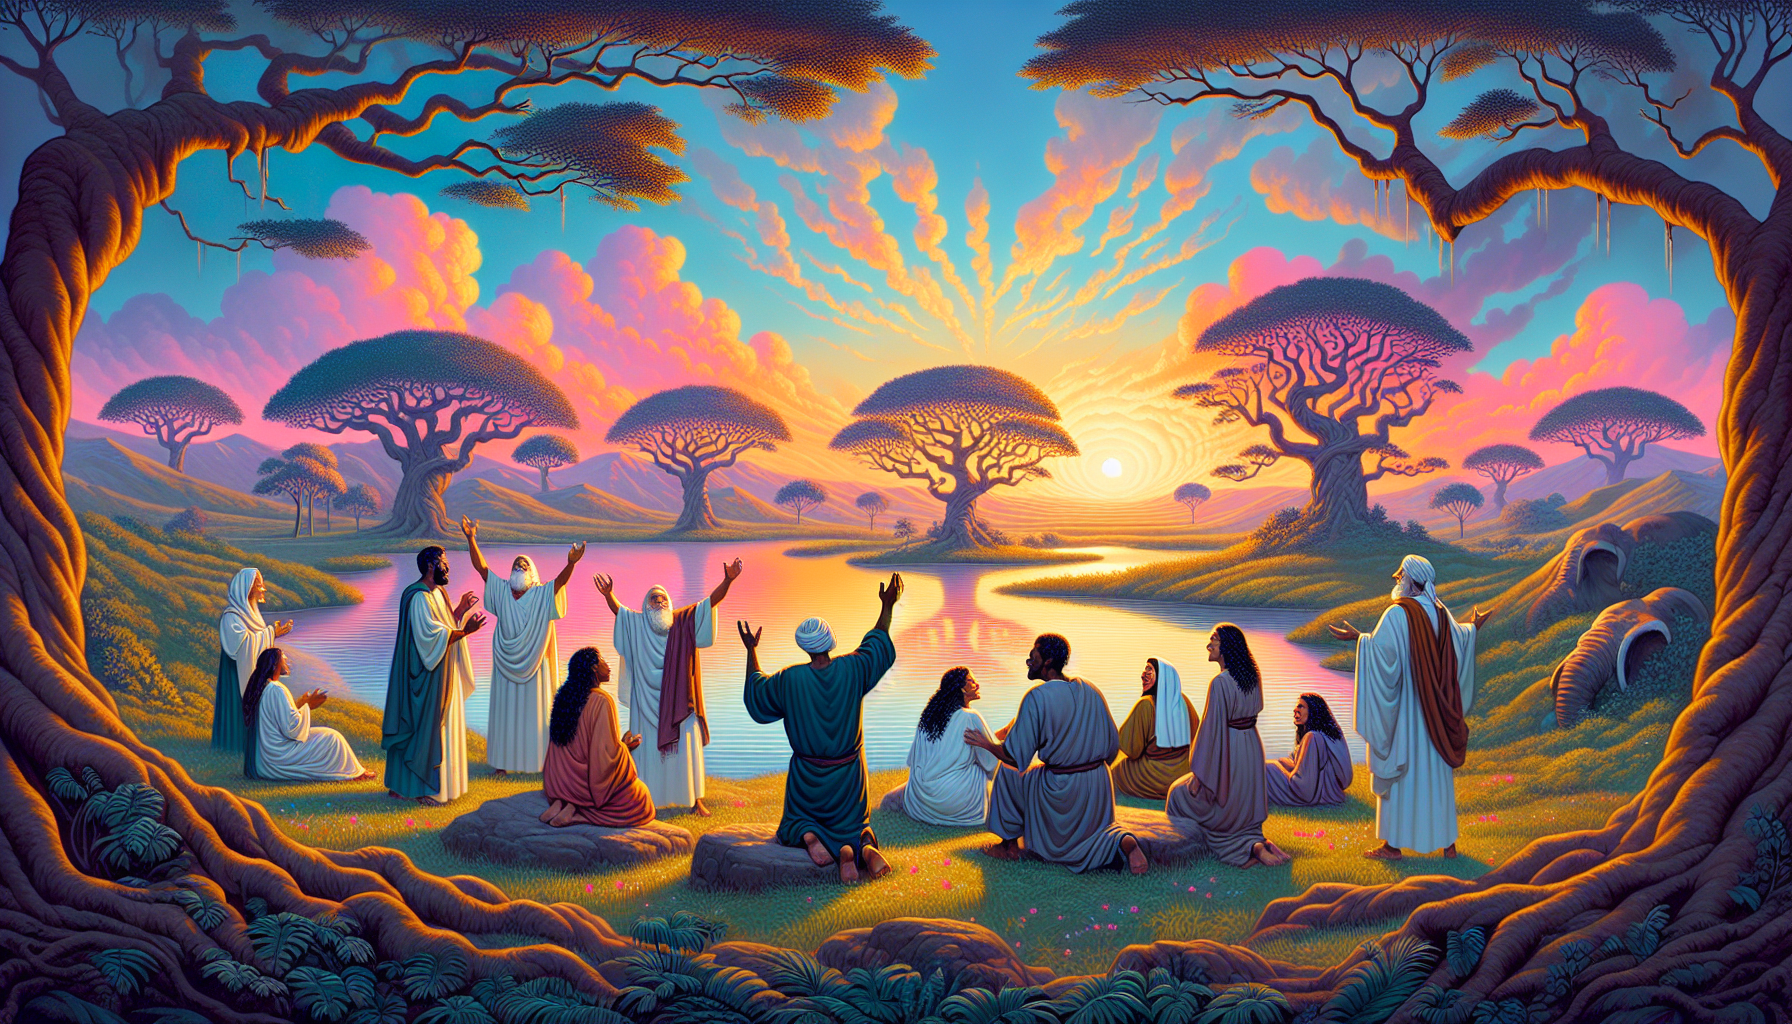 Create a serene biblical landscape at sunrise, featuring a small group of diverse people gathered around a tranquil body of water, singing and rejoicing together. In the background, ancient trees and